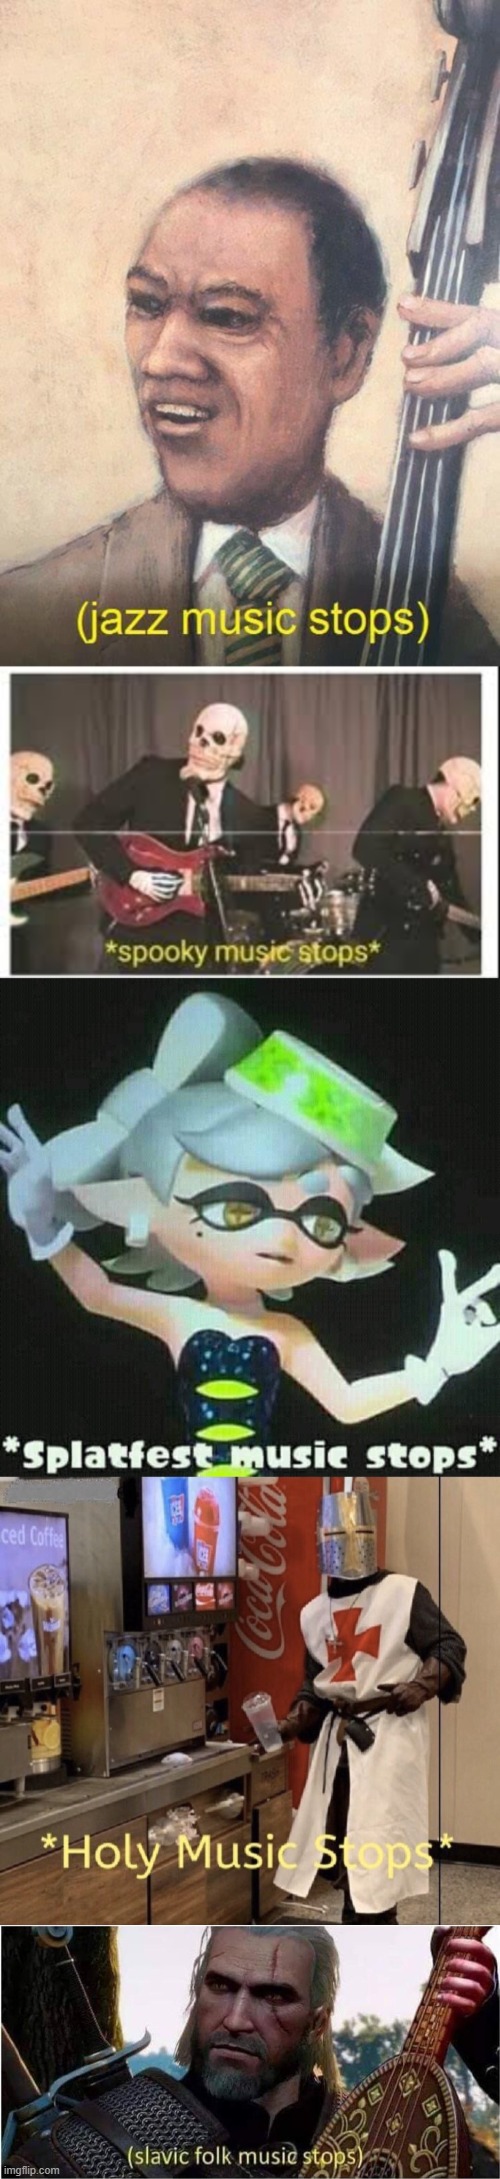 image tagged in jazz music stops,spooky music stops,splatfest music stops,holy music stops,slavic folk music stops | made w/ Imgflip meme maker